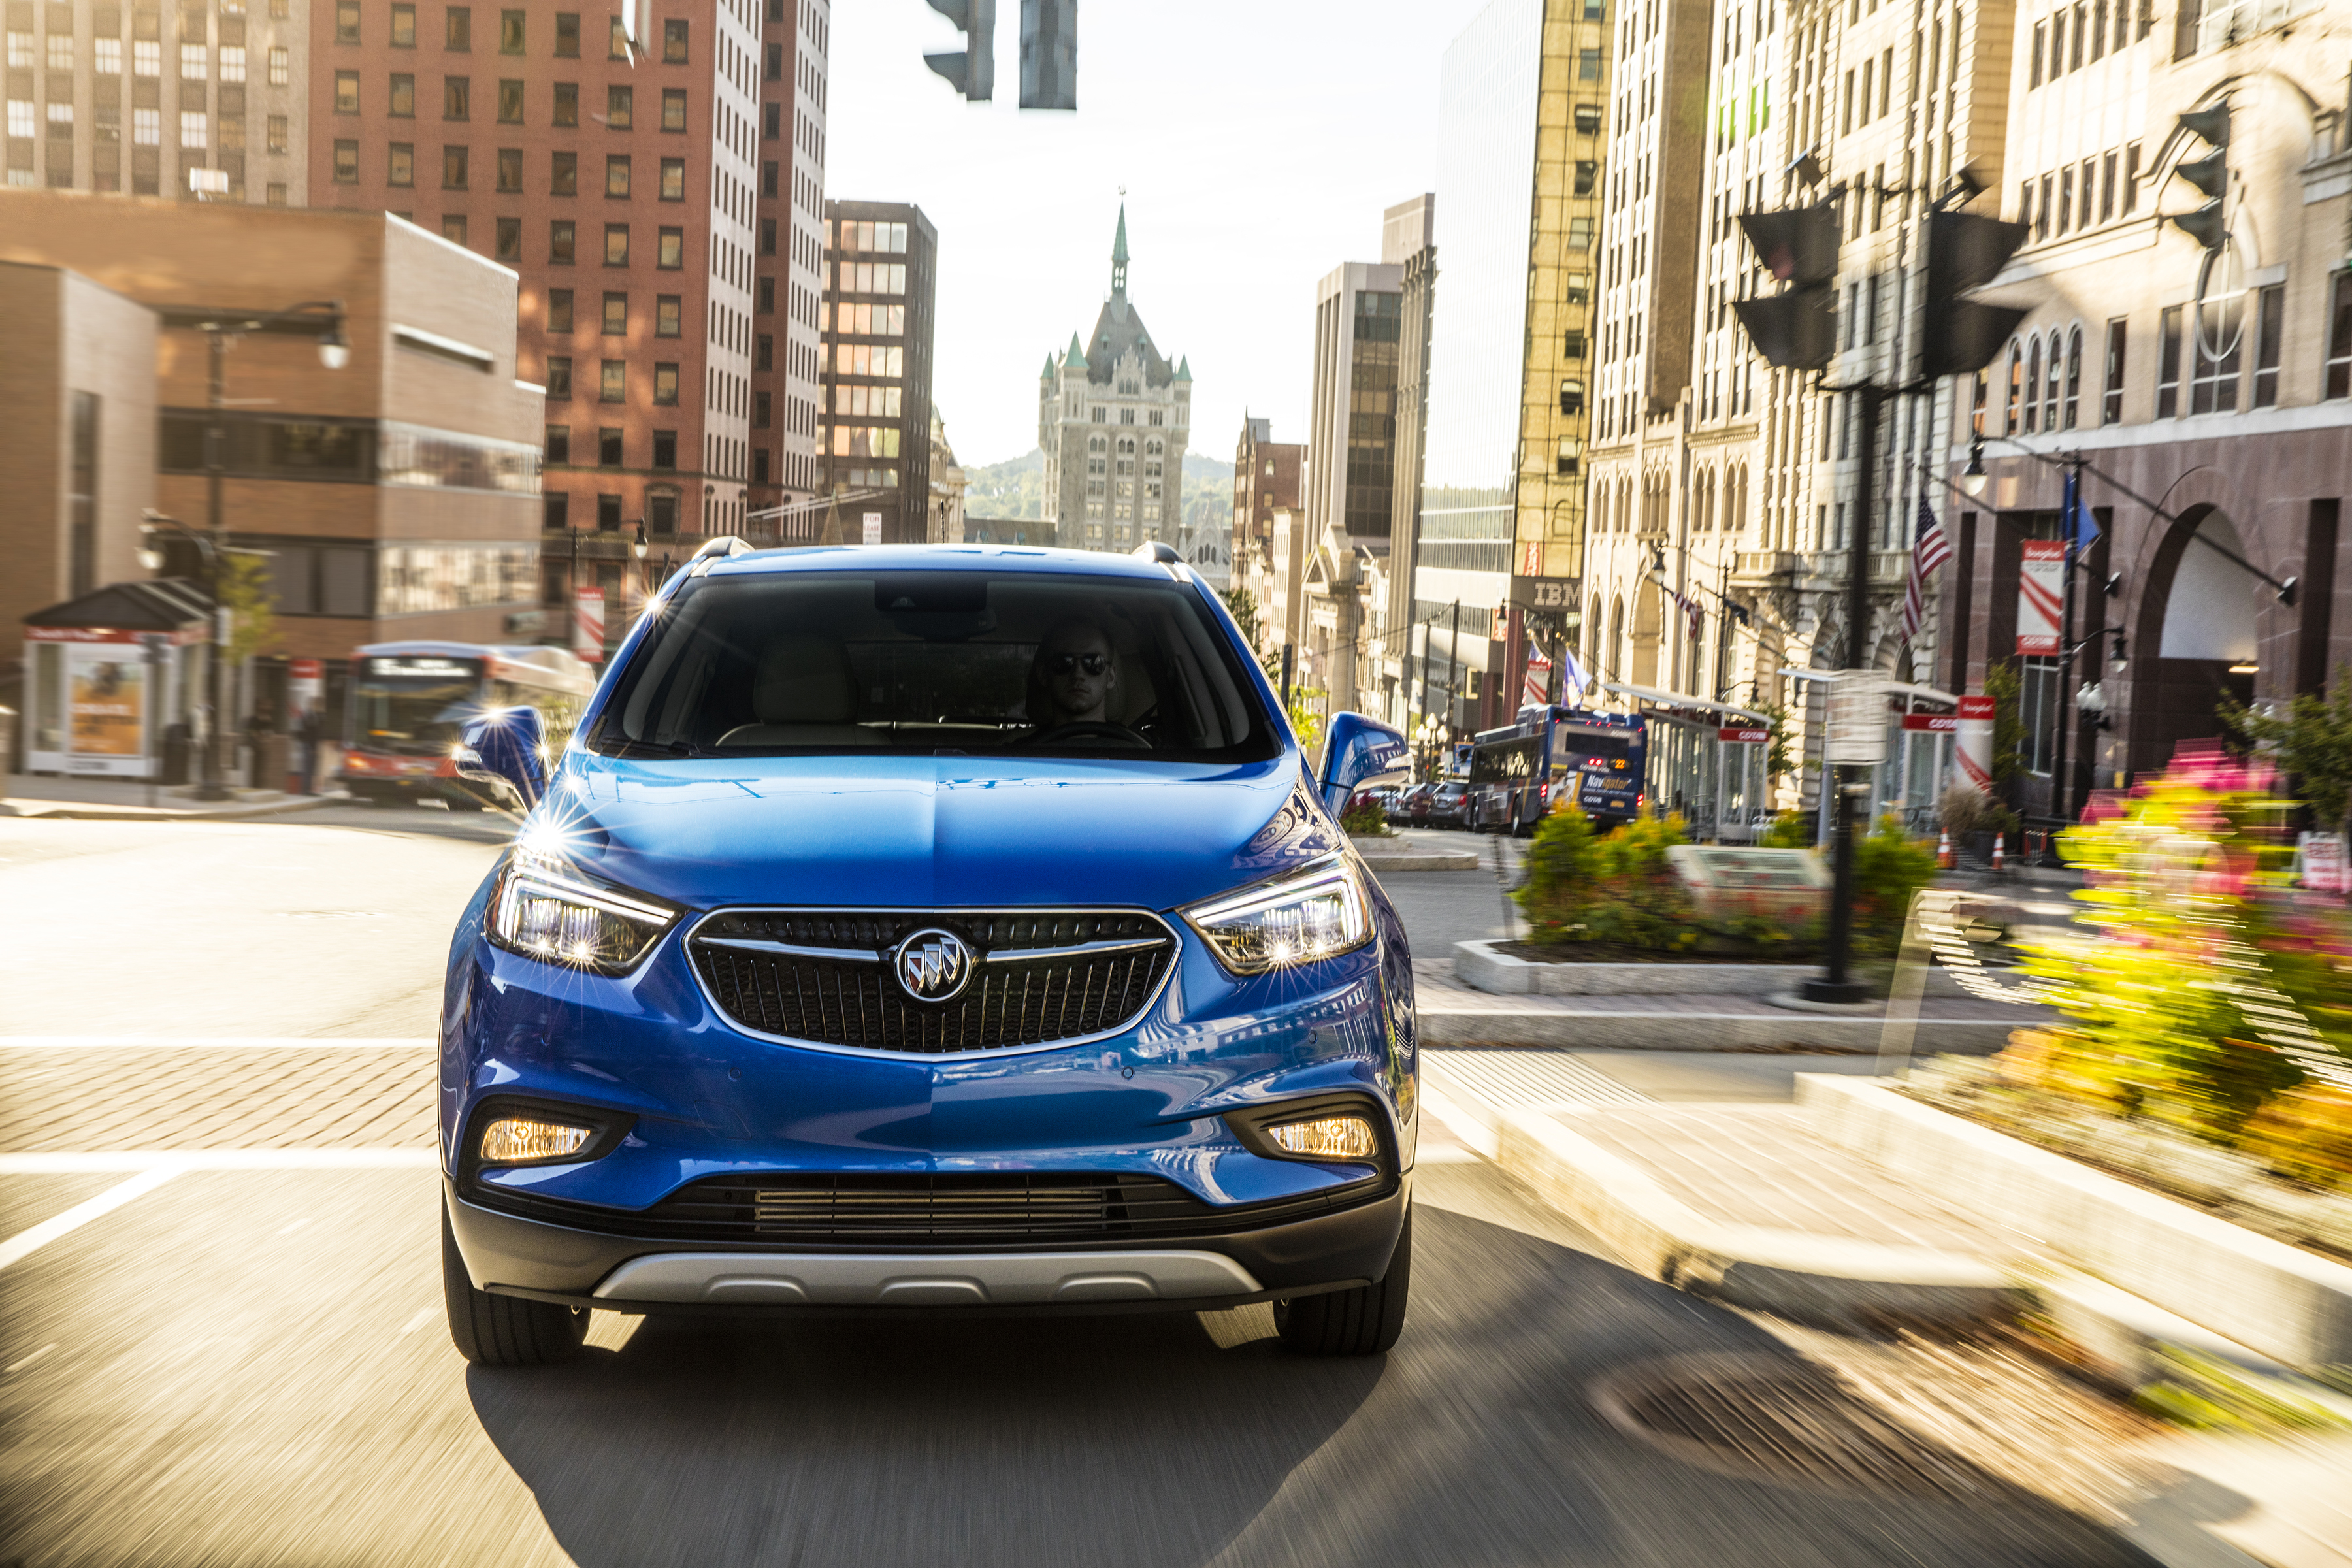 Electric Buick Encore driving through city streets.